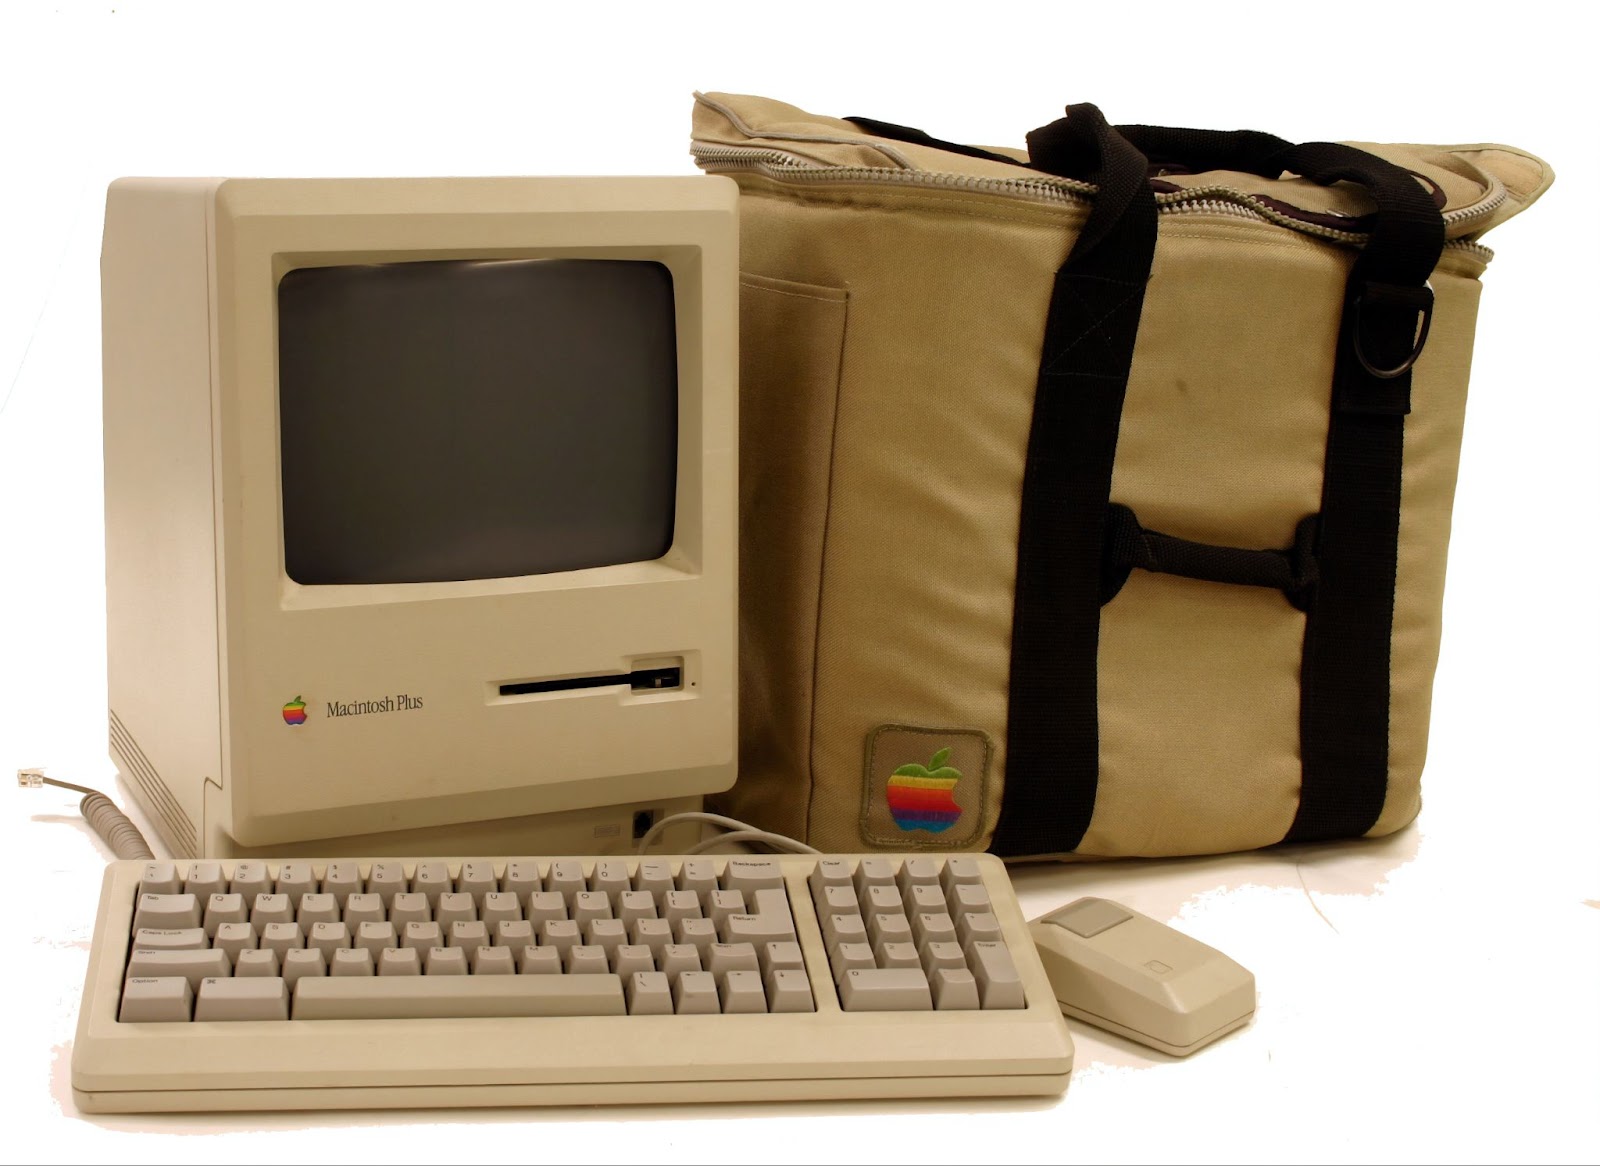 The story behind the macintosh commercial